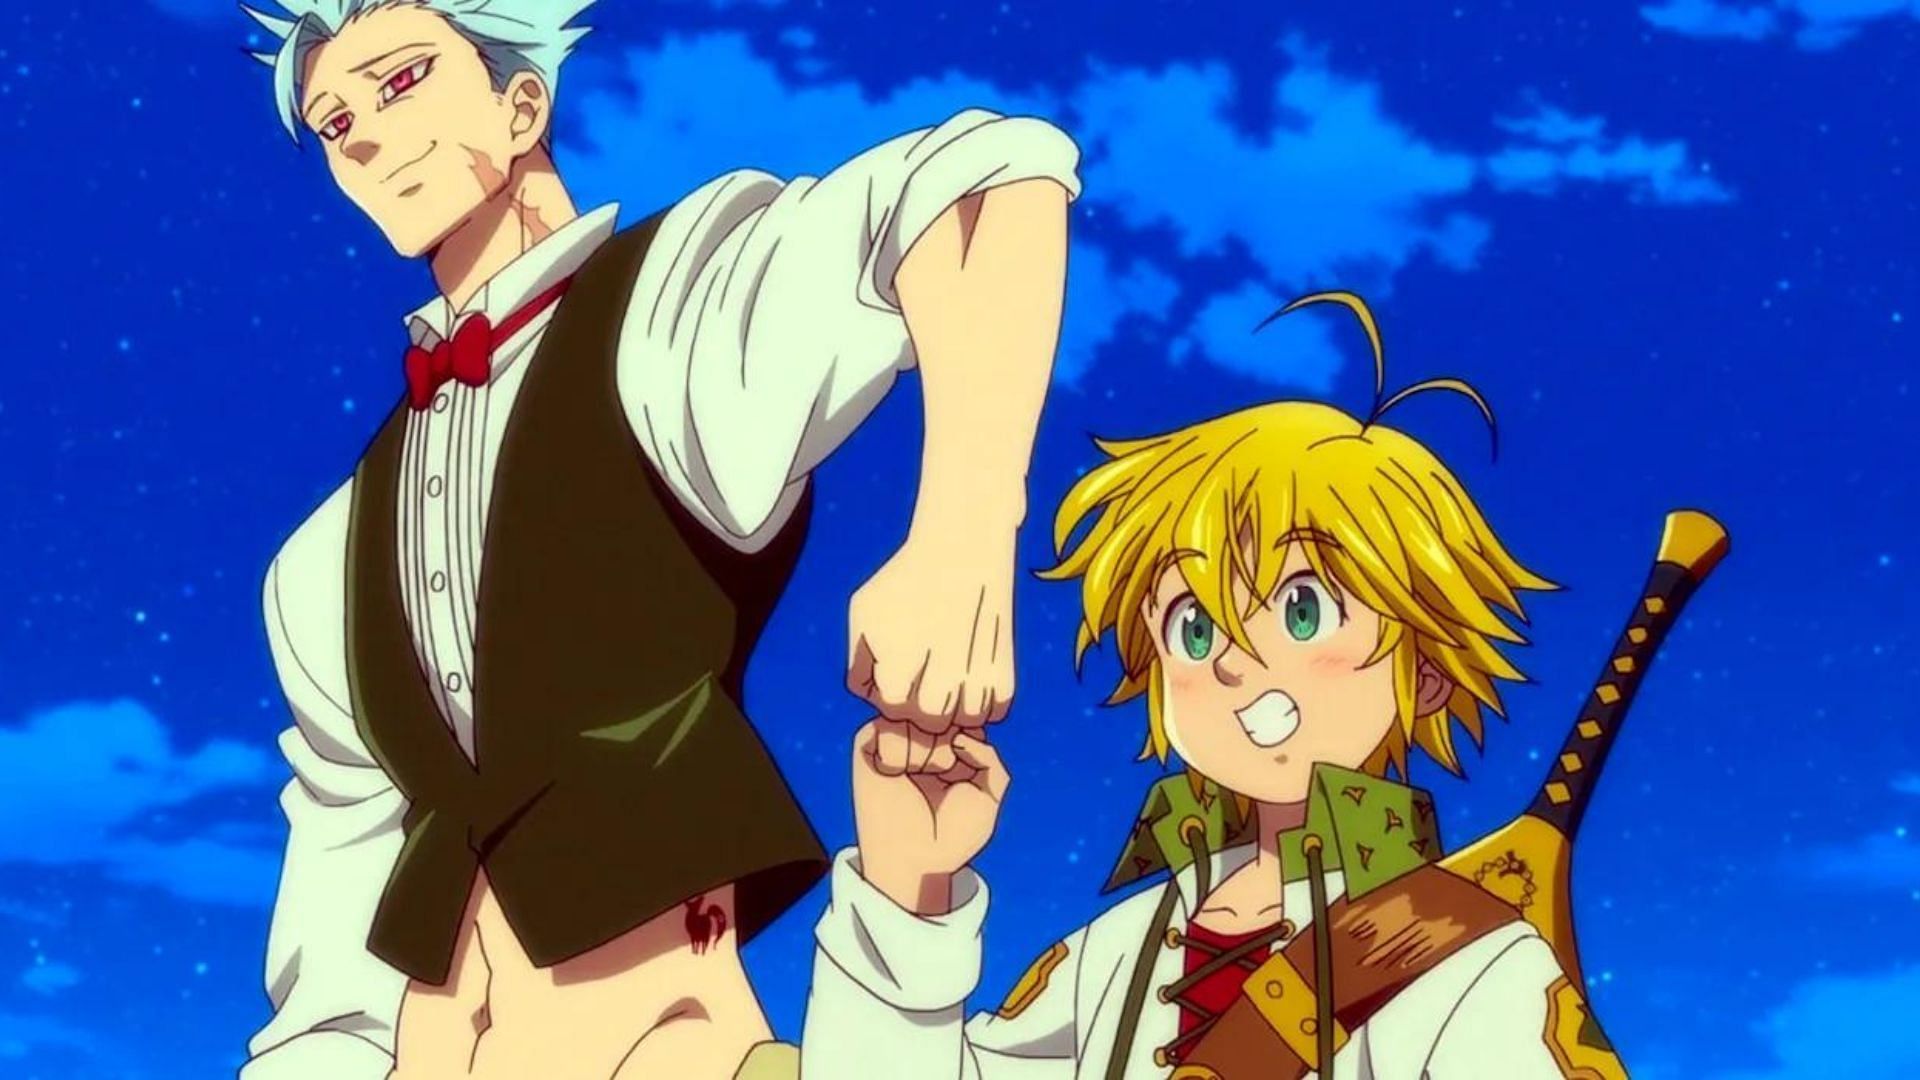 Ban and Meliodas as seen in The Seven Deadly Sins (Image via A-1 Pictures)